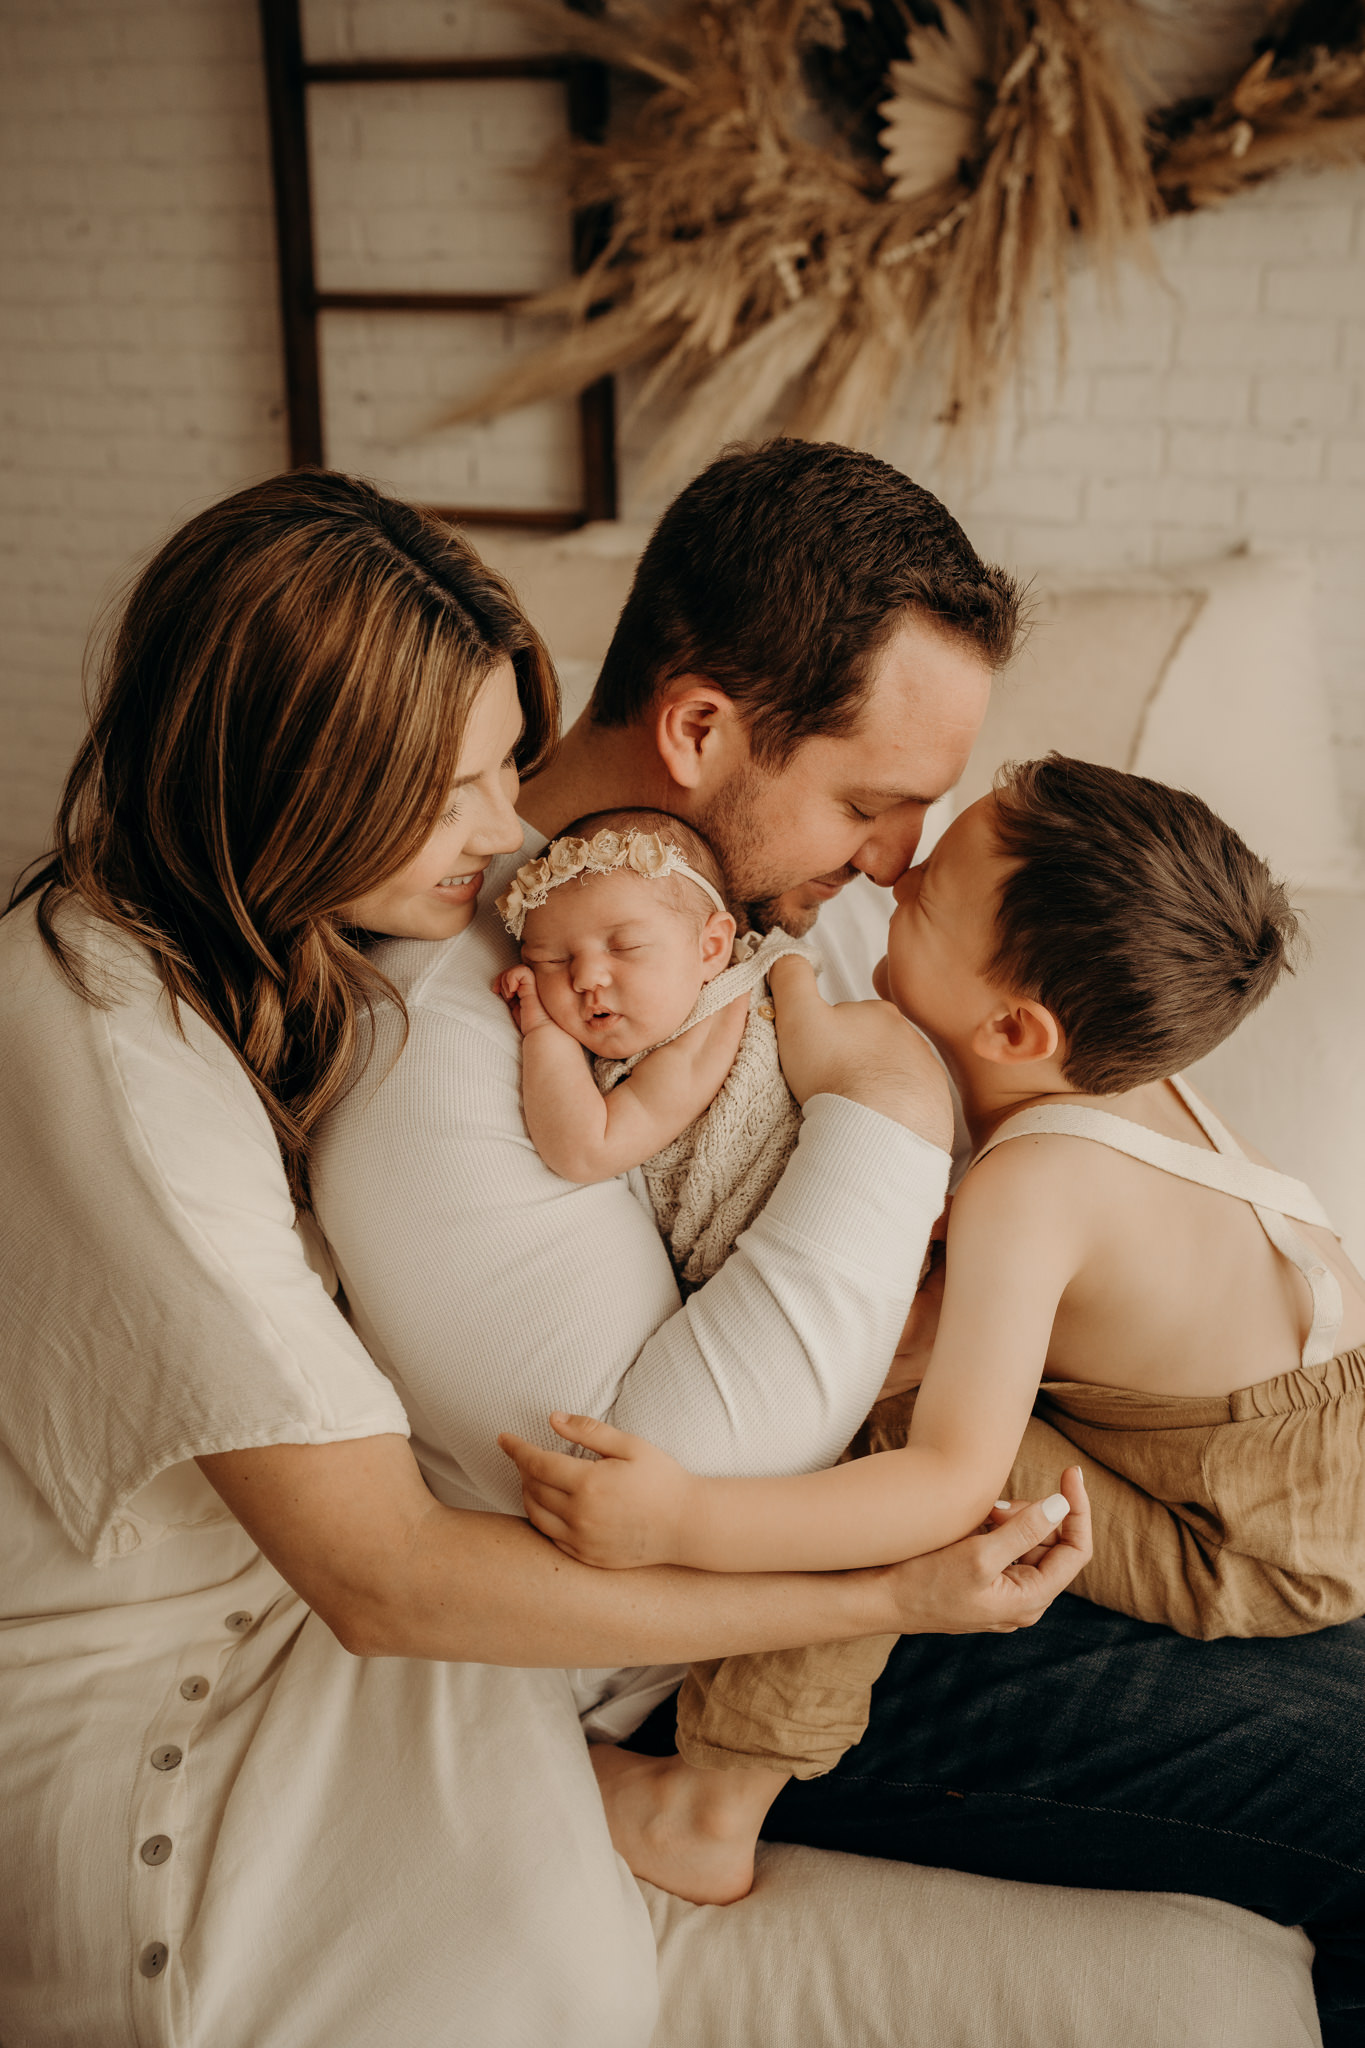 Dallas, Texas newborn photographer capturing the true emotion and joy welcoming a new baby into the world.